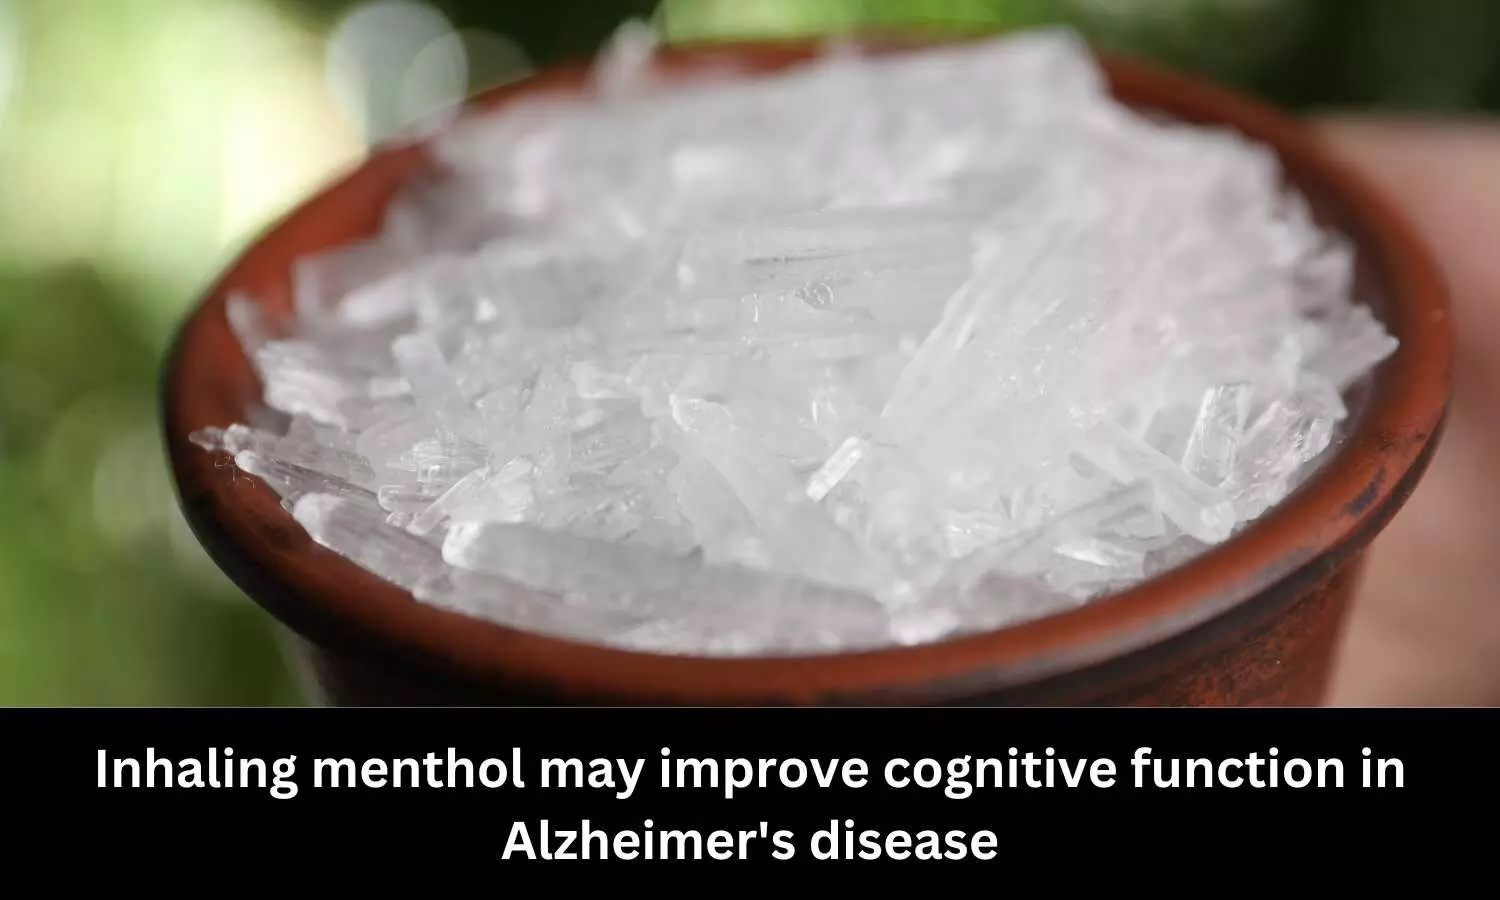 Menthol inhalation may improve cognitive function in Alzheimers disease